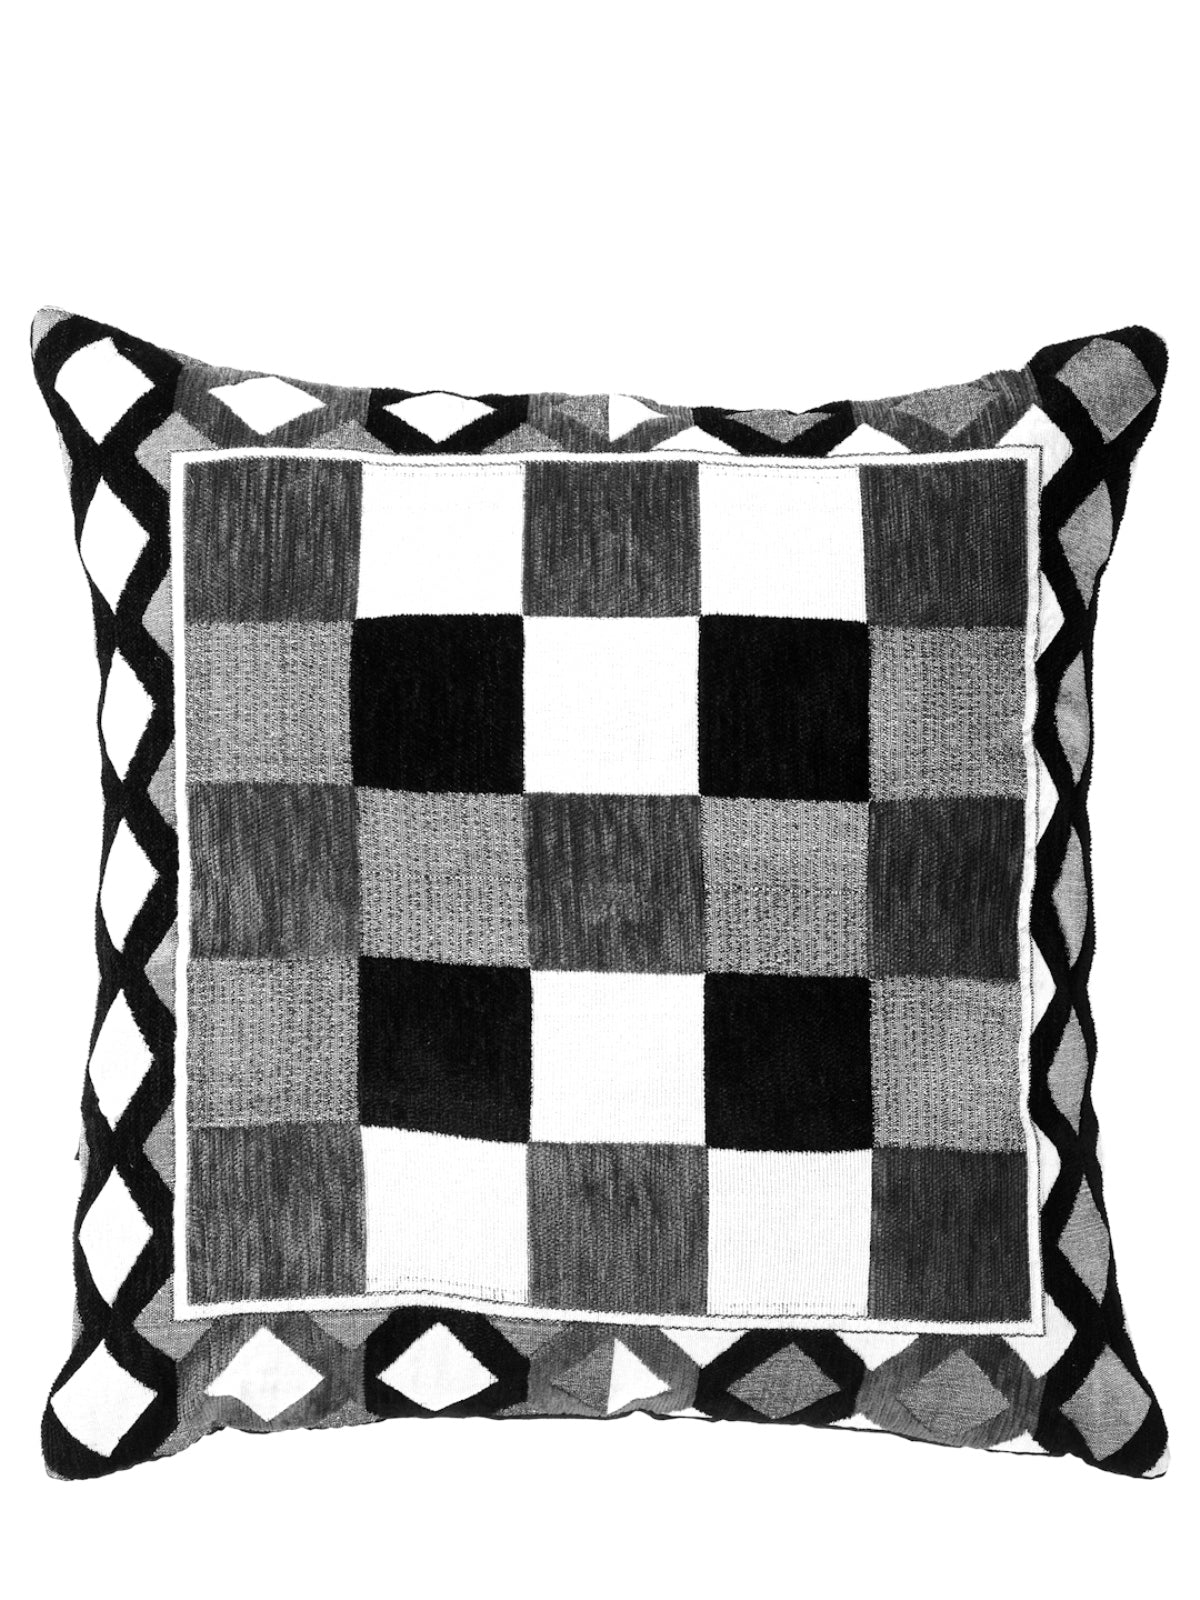 Soft Chenille Geometric Throw Pillow/Cushion Covers 16 x 16 inch, Set of 5 - Black